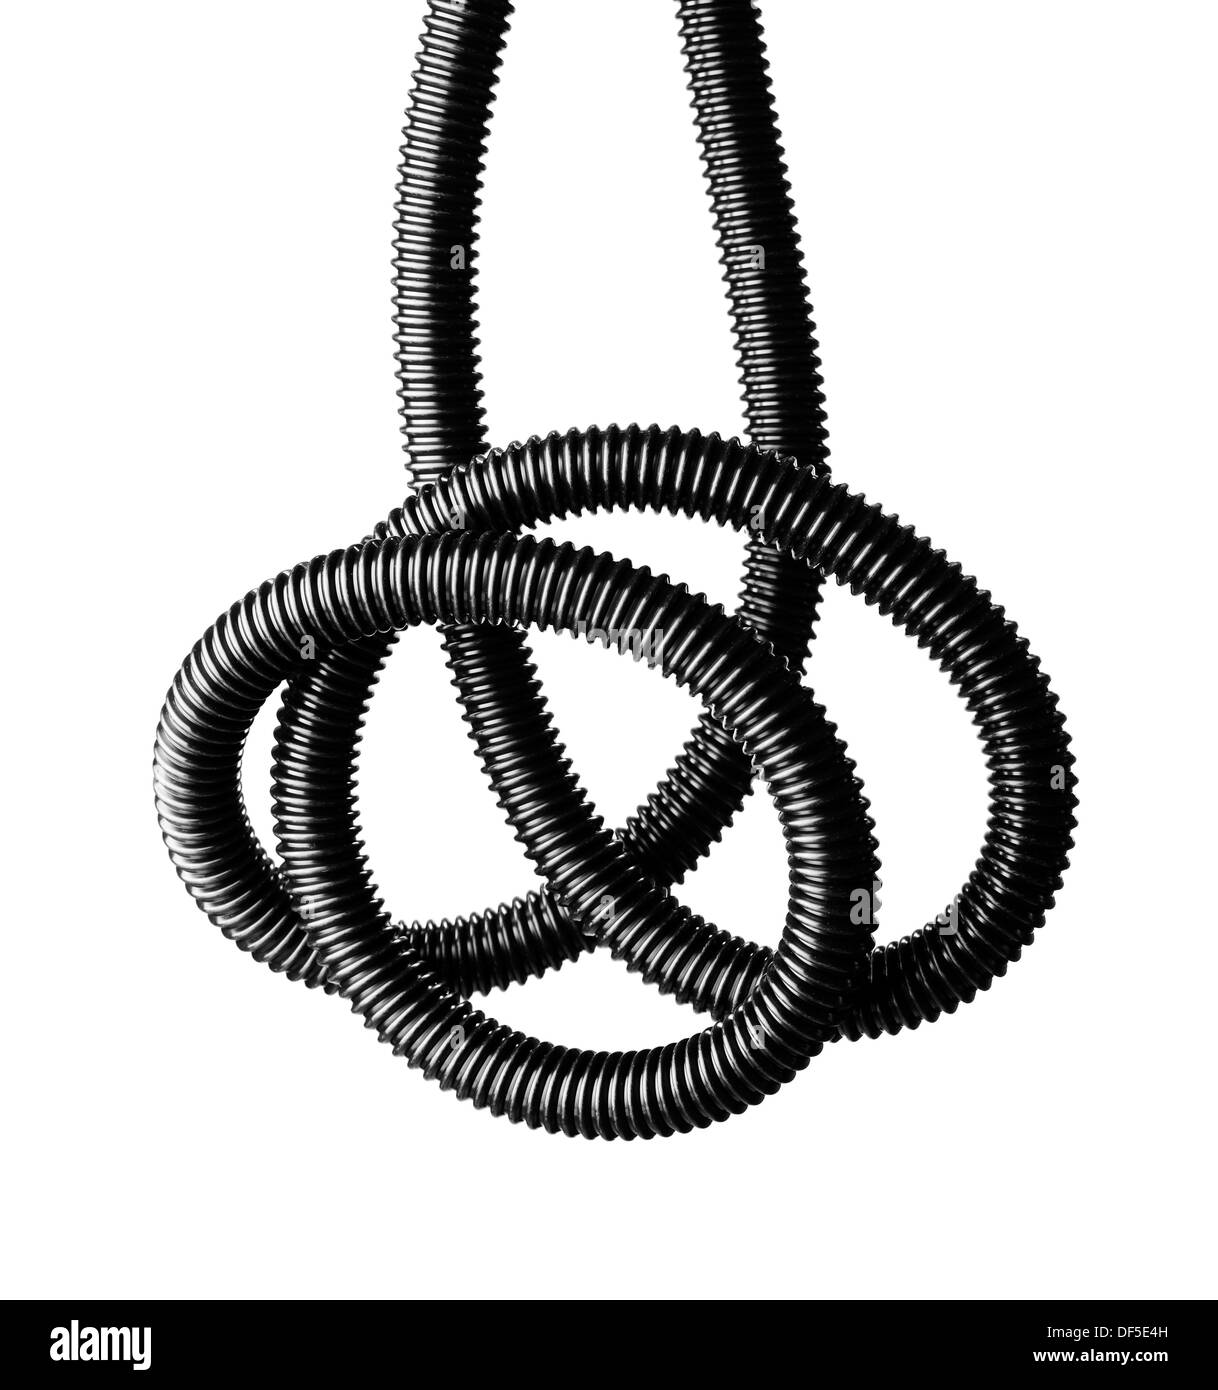 Black and white image of a black tangled flexible hose. Stock Photo